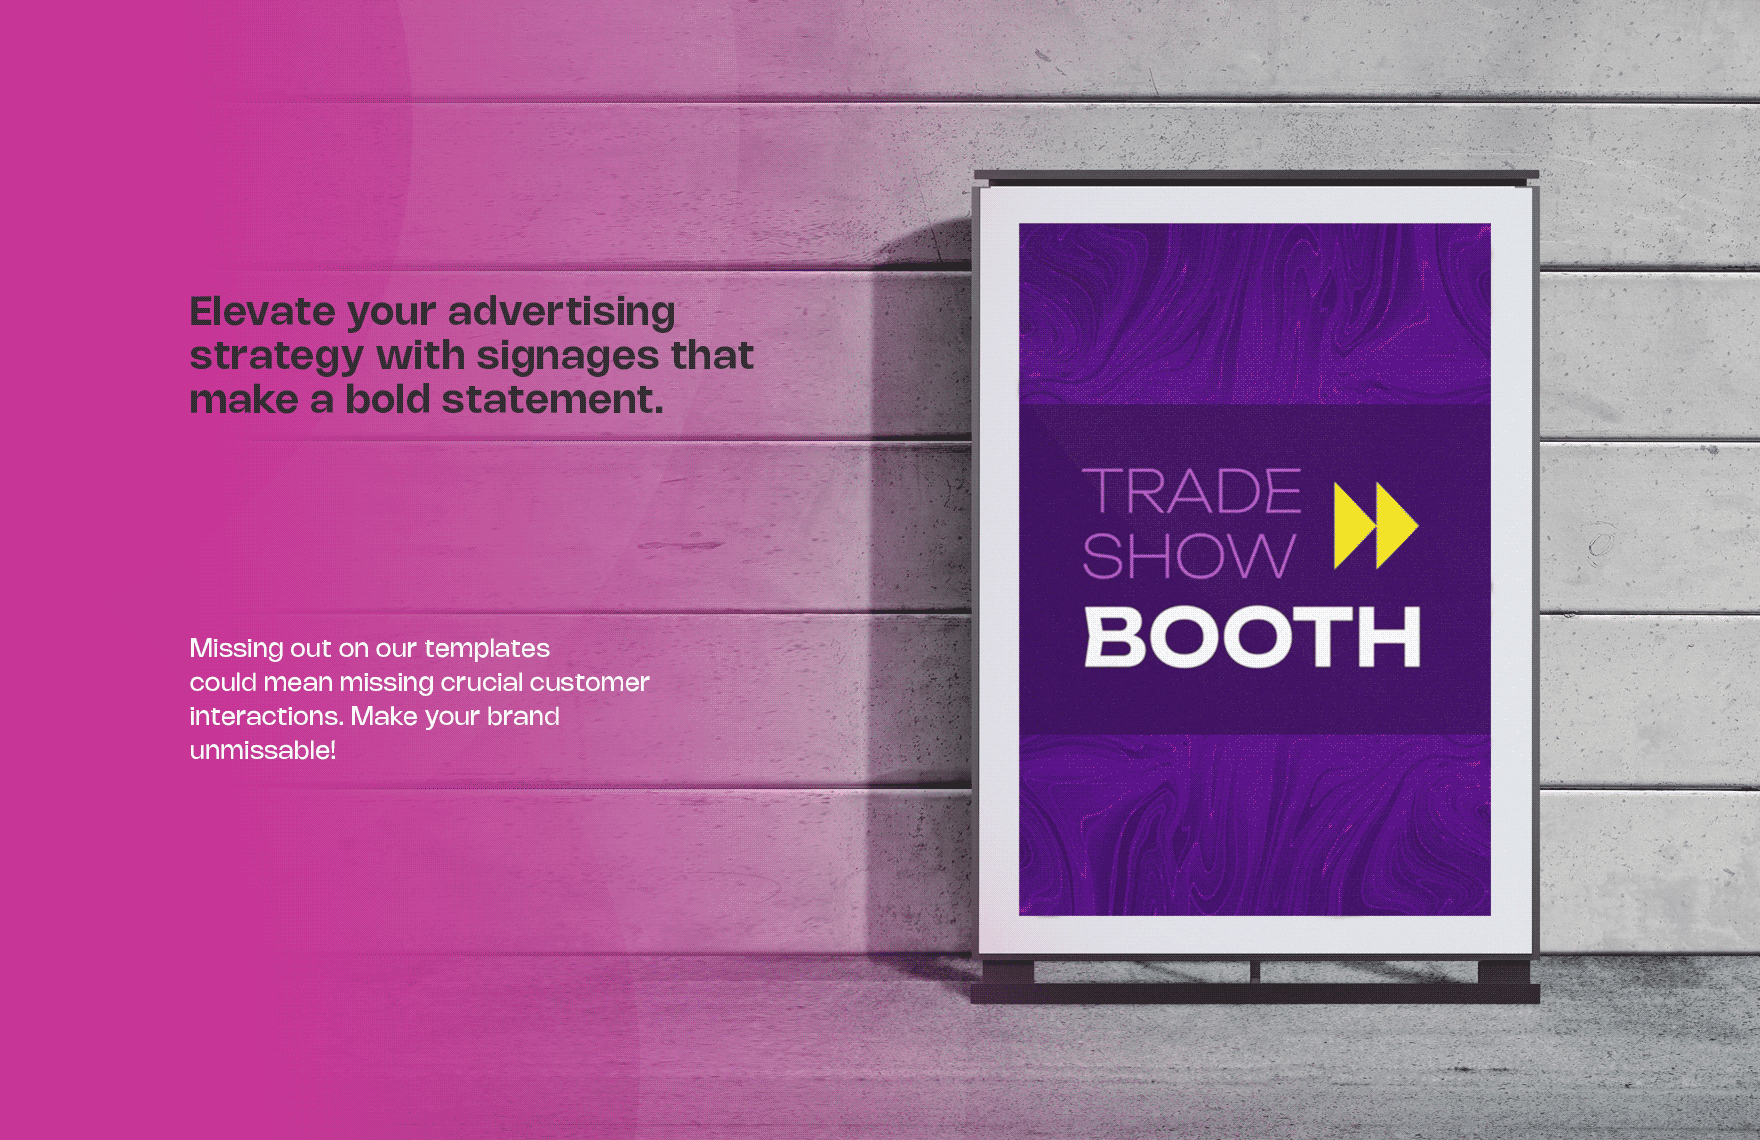 Trade Show Booth Signage Template